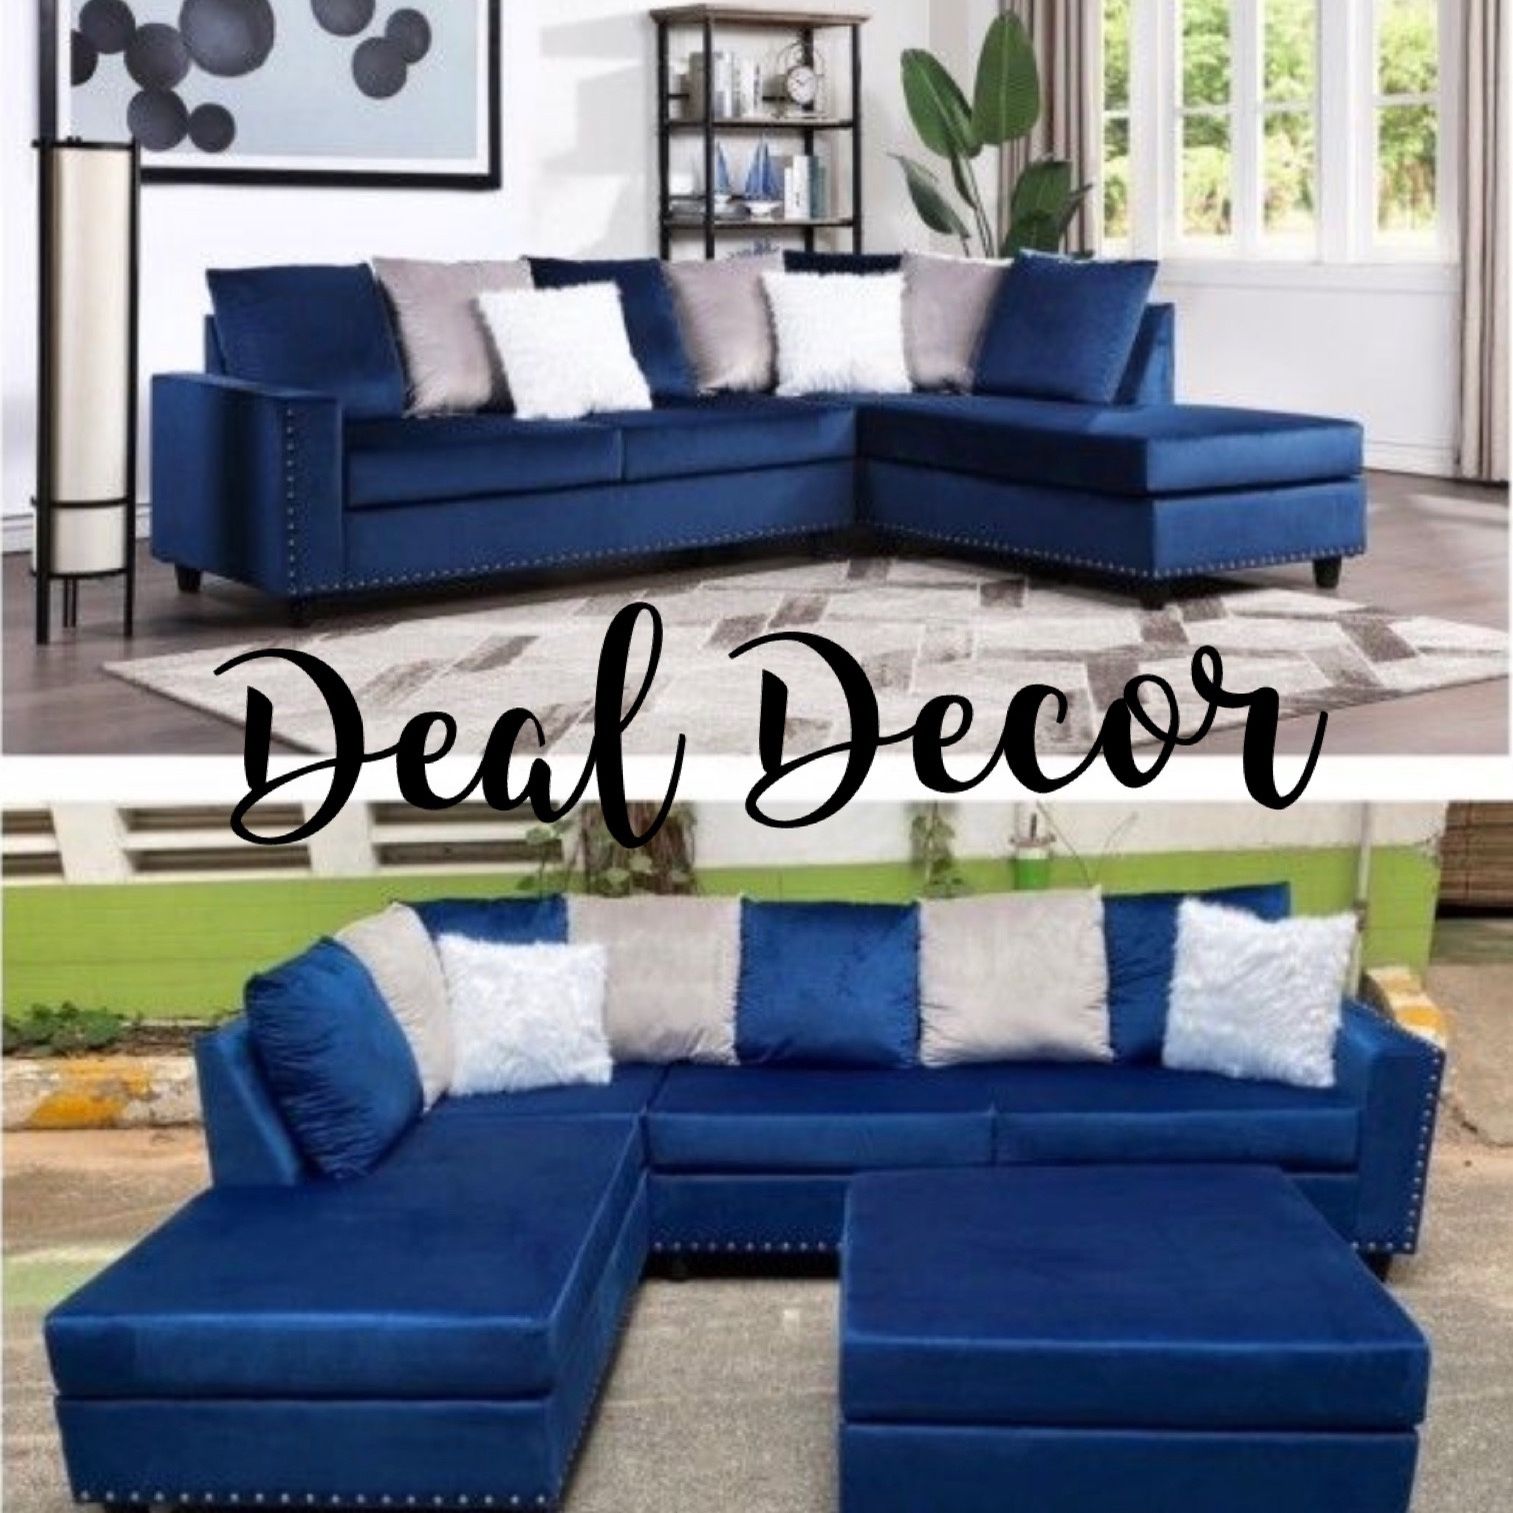 New Blue Velvet Sectional Sofa Couch with Pillows Ottoman Extra 